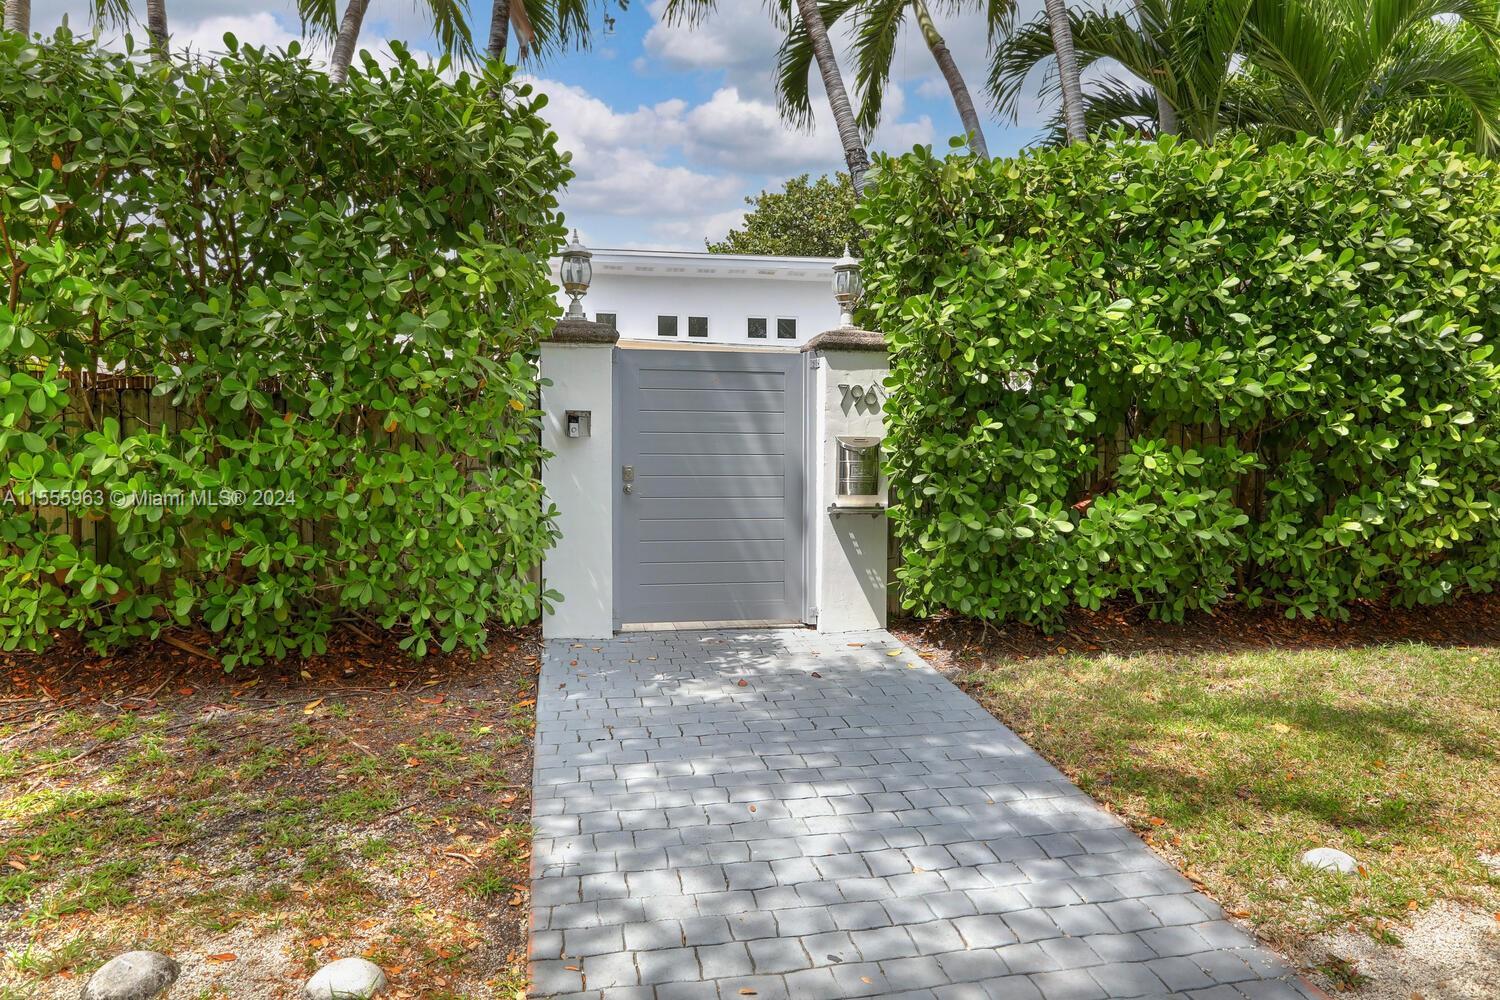 Desirable corner property in Key Biscayne.  (West Mashta and Glenridge Rd)  4 Bedrooms and 3.5 bathr